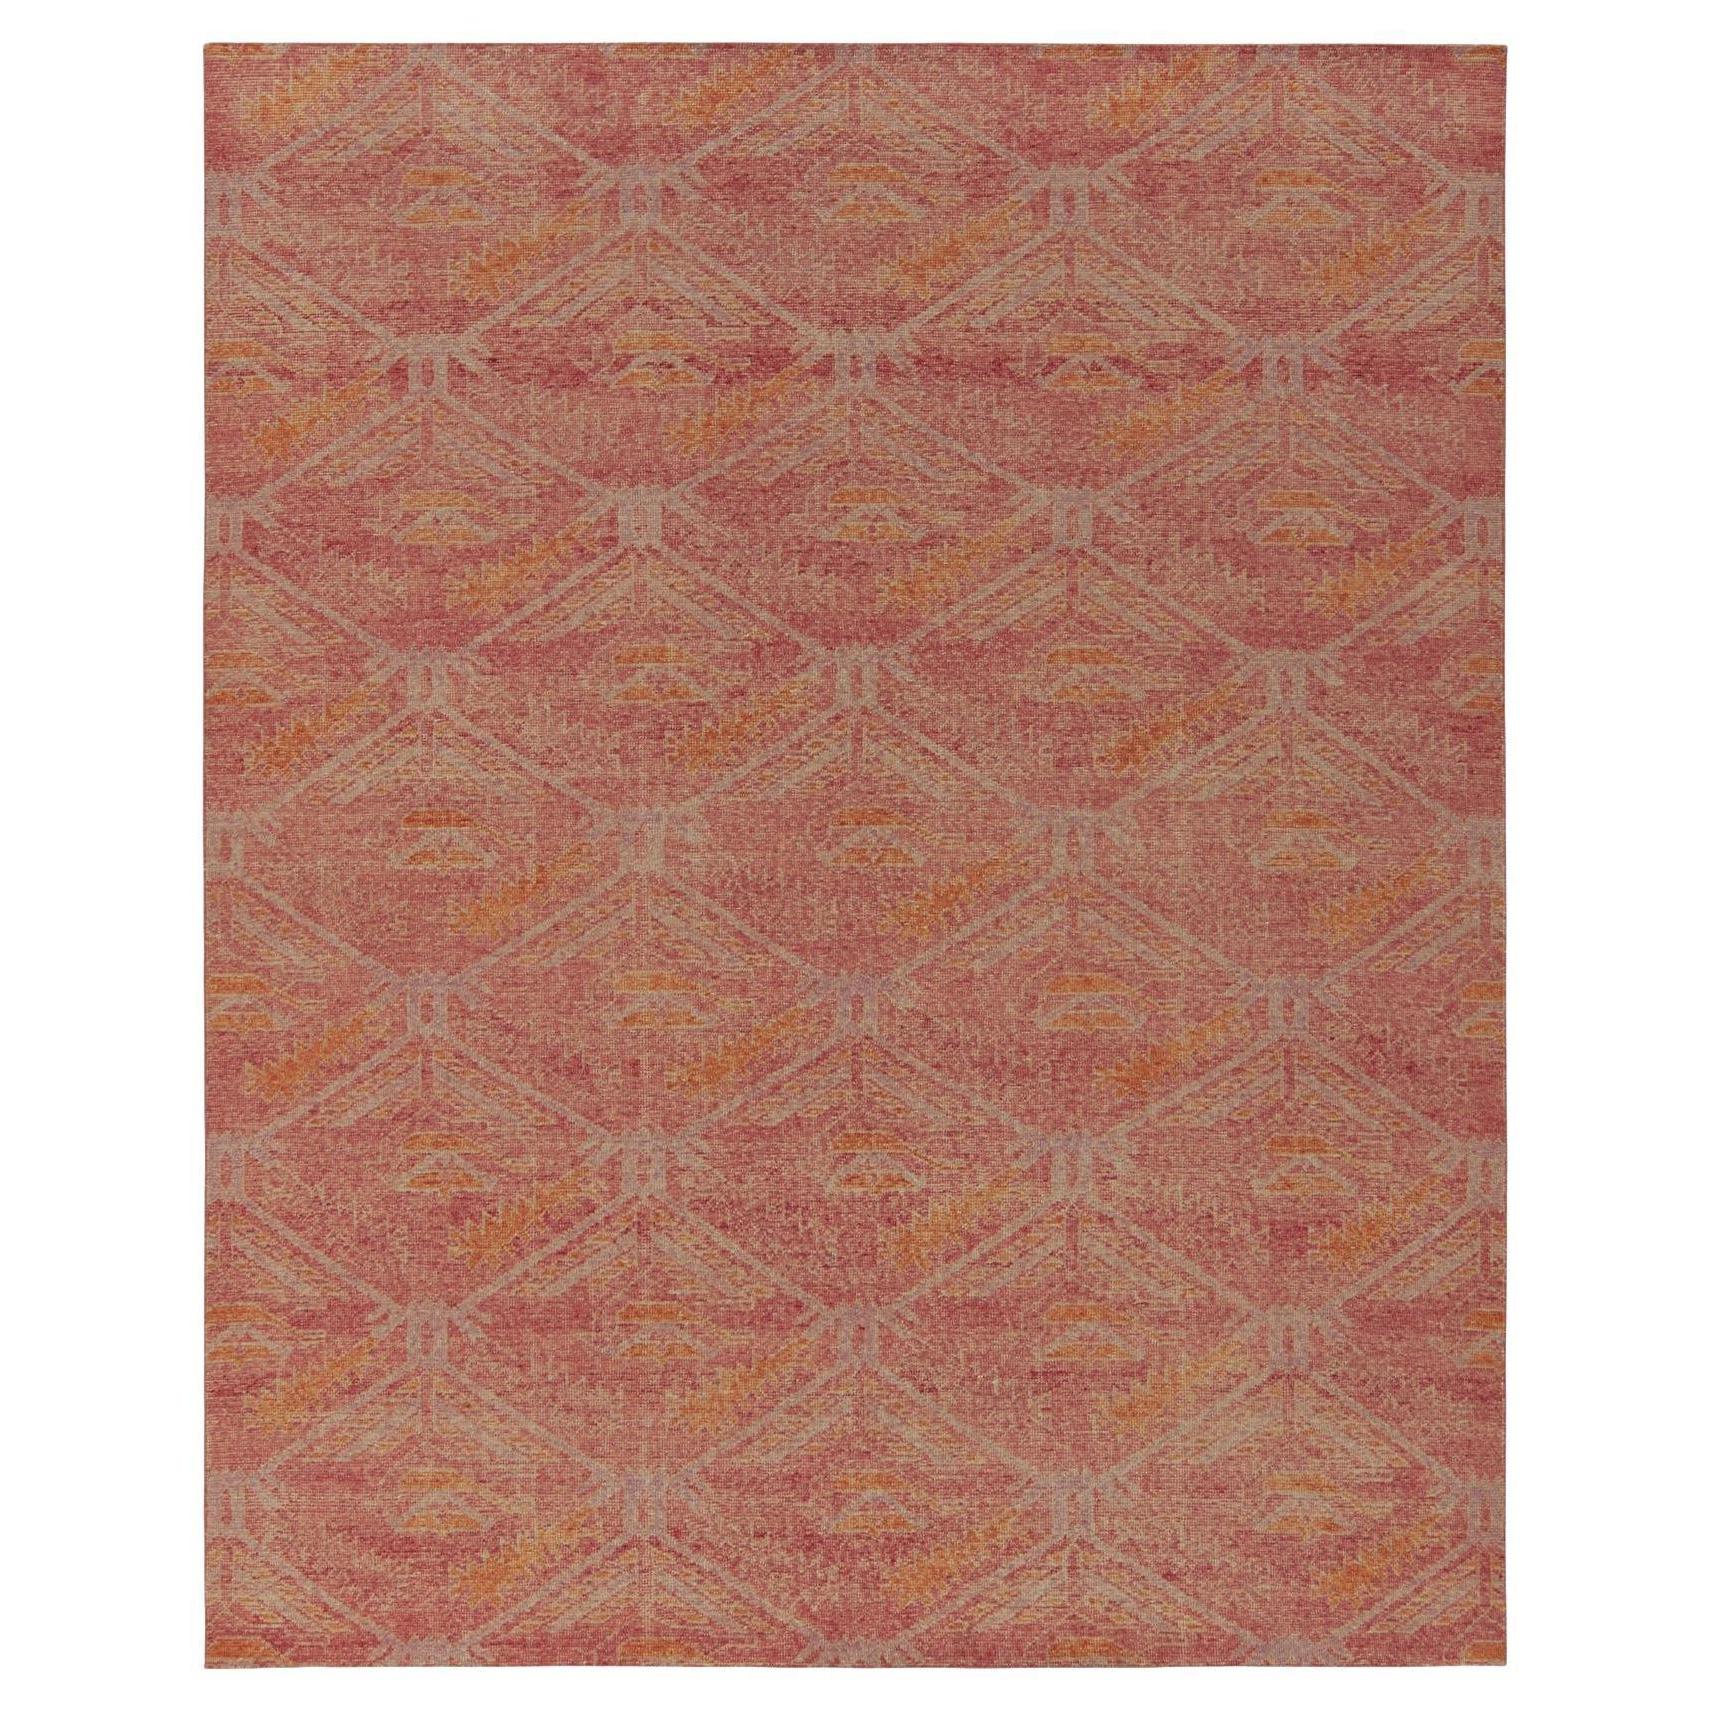 Rug & Kilim’s Distressed Kuba Style Rug in Red with Orange Tribal Patterns For Sale